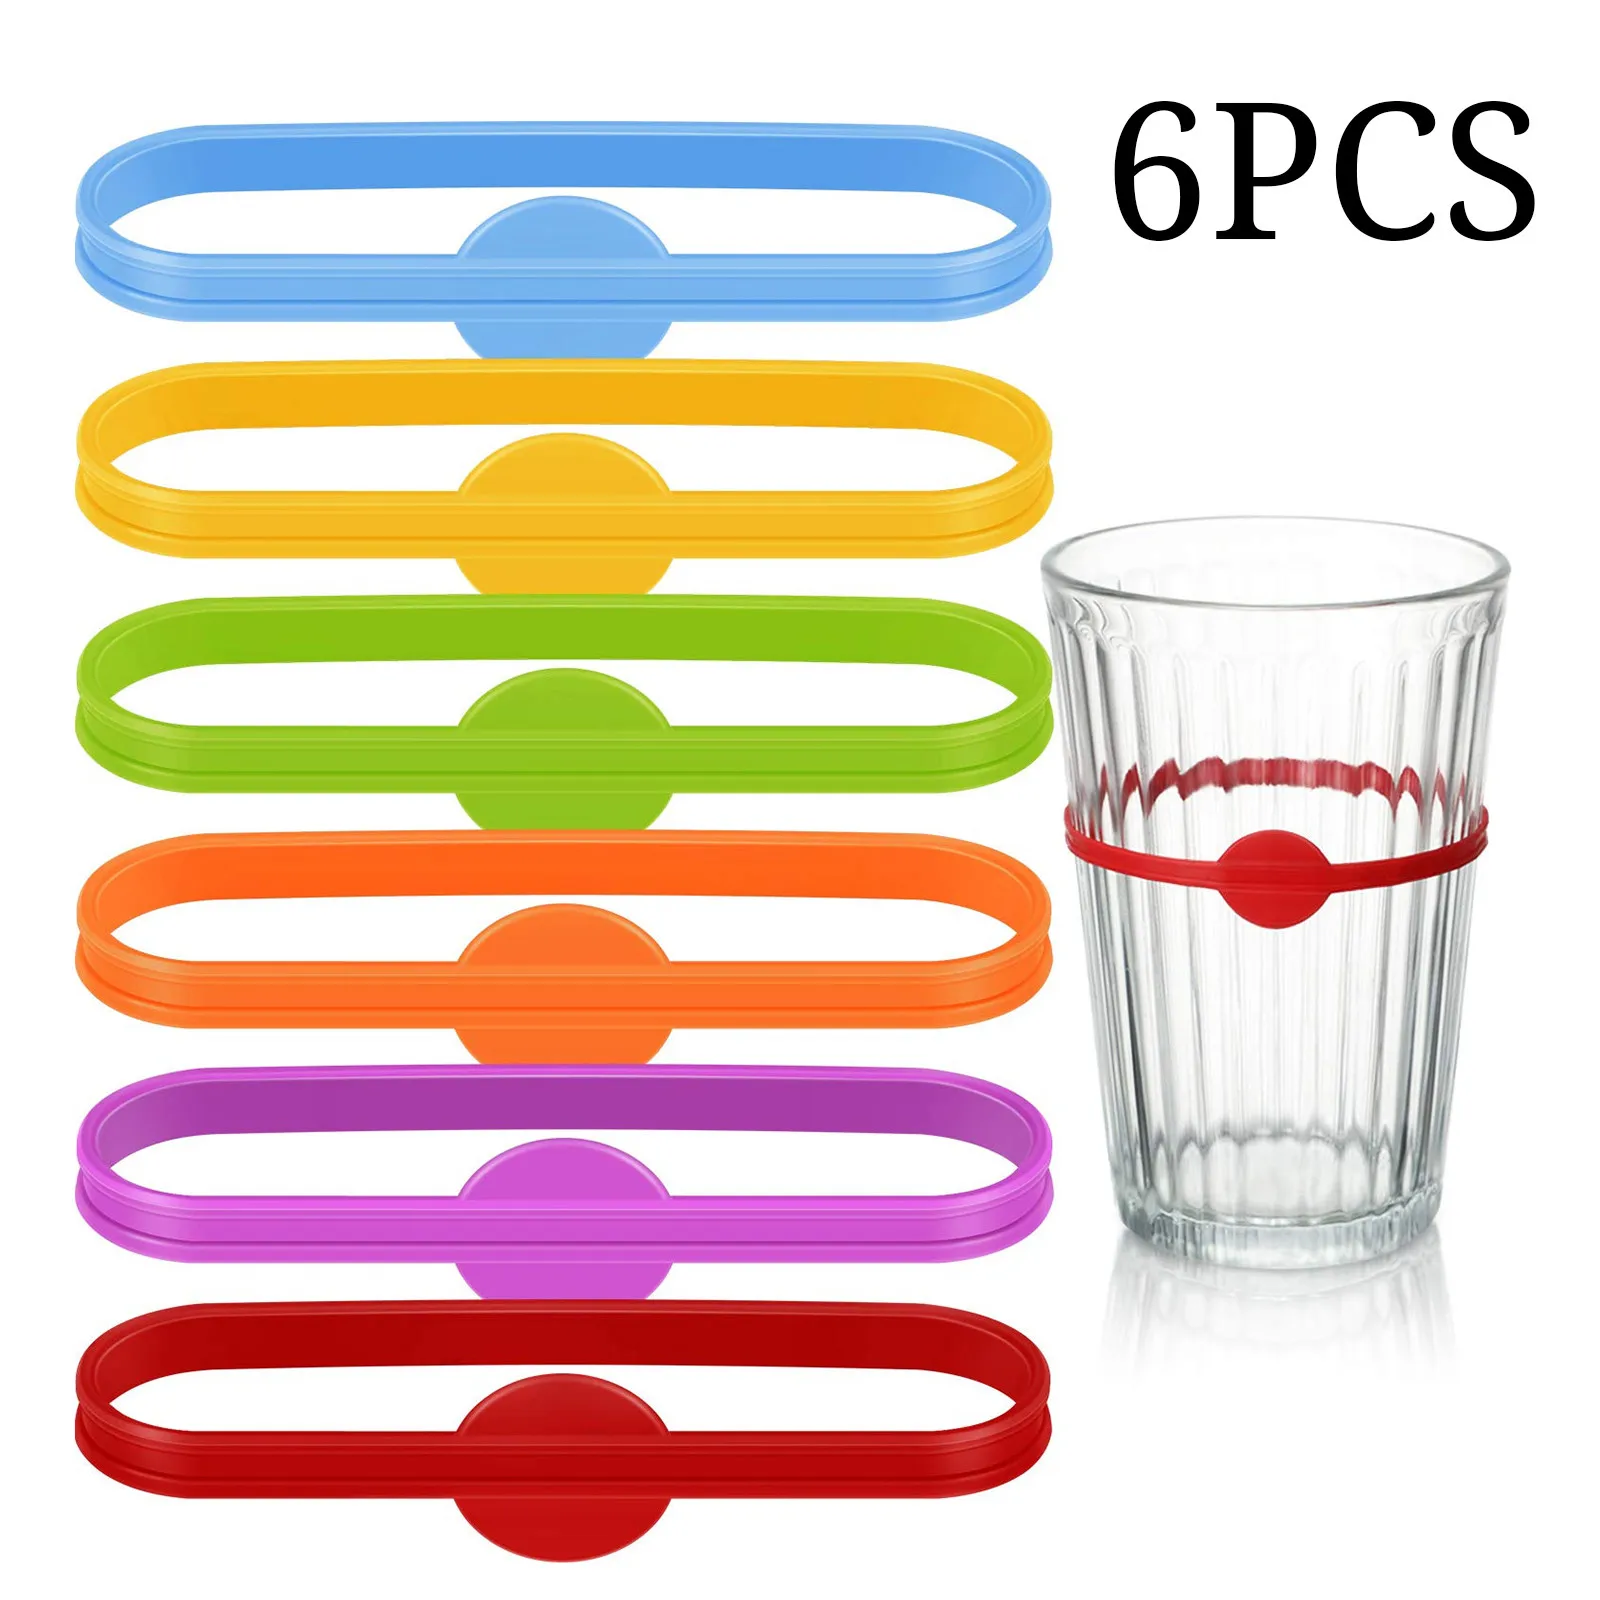 

6pcs Silicone Wine Cup Glass Markers Party Goblet Wine Drinking Cup Marking Tags for Home Bar Kitchen Tool Accessories